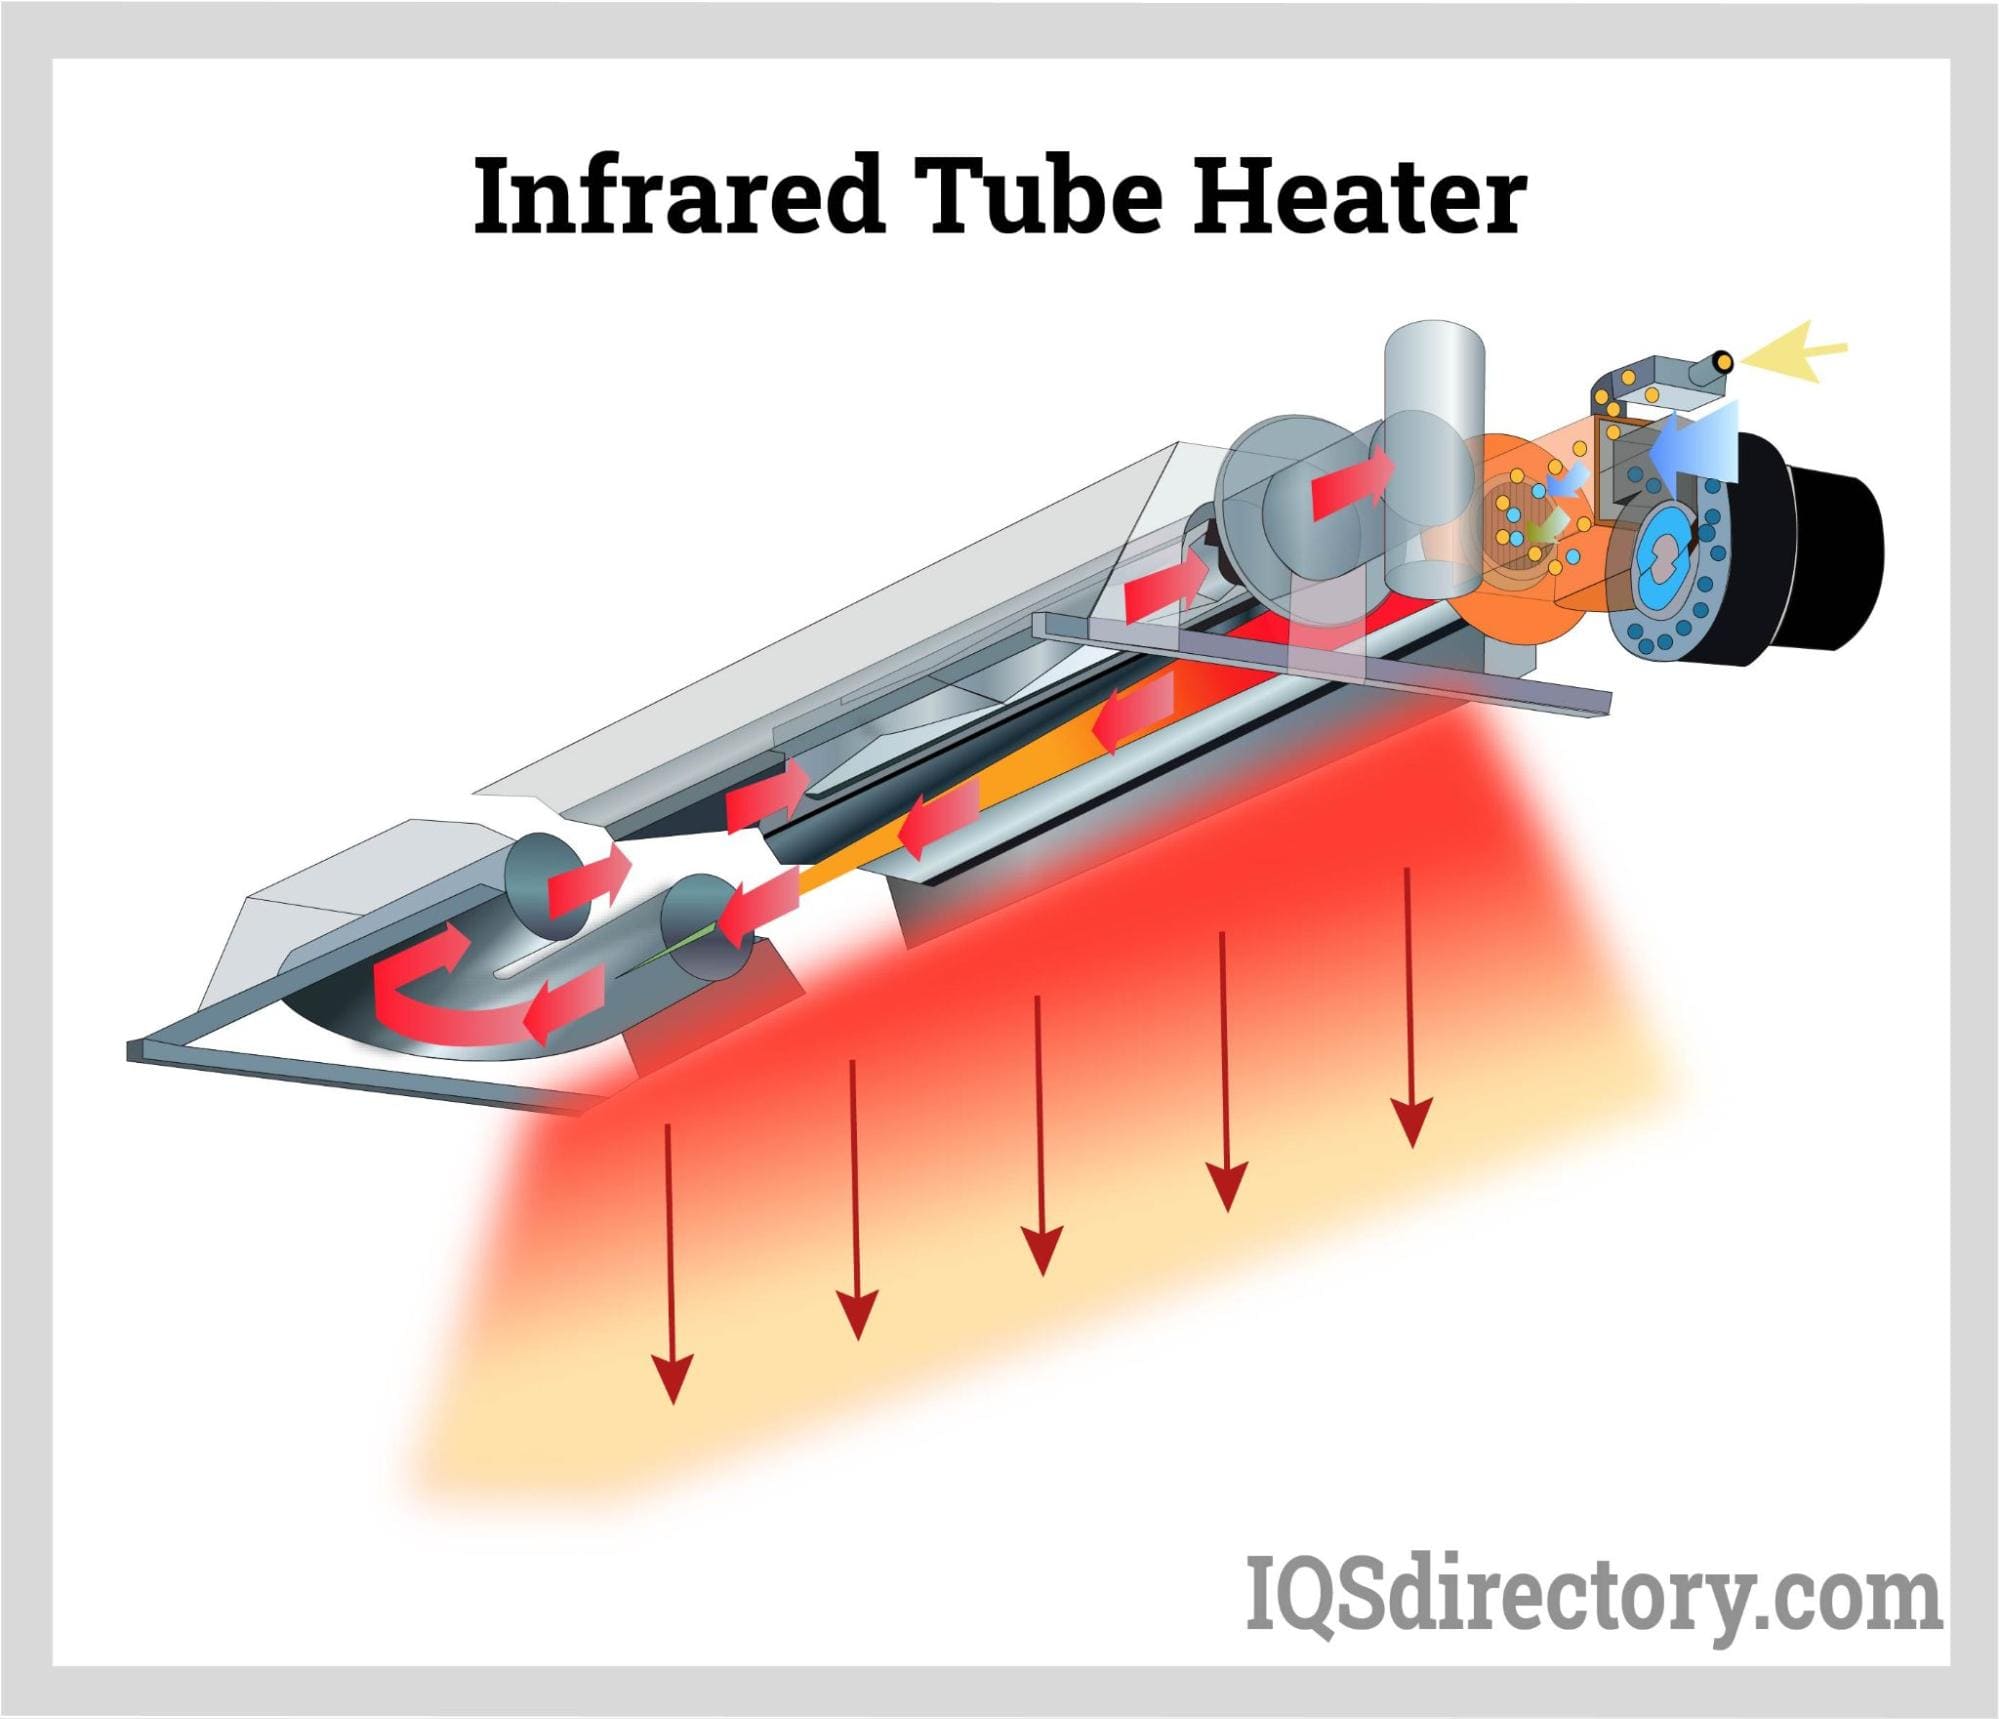 Infrared Heating: What Is It? How Does It Work? Types, Uses